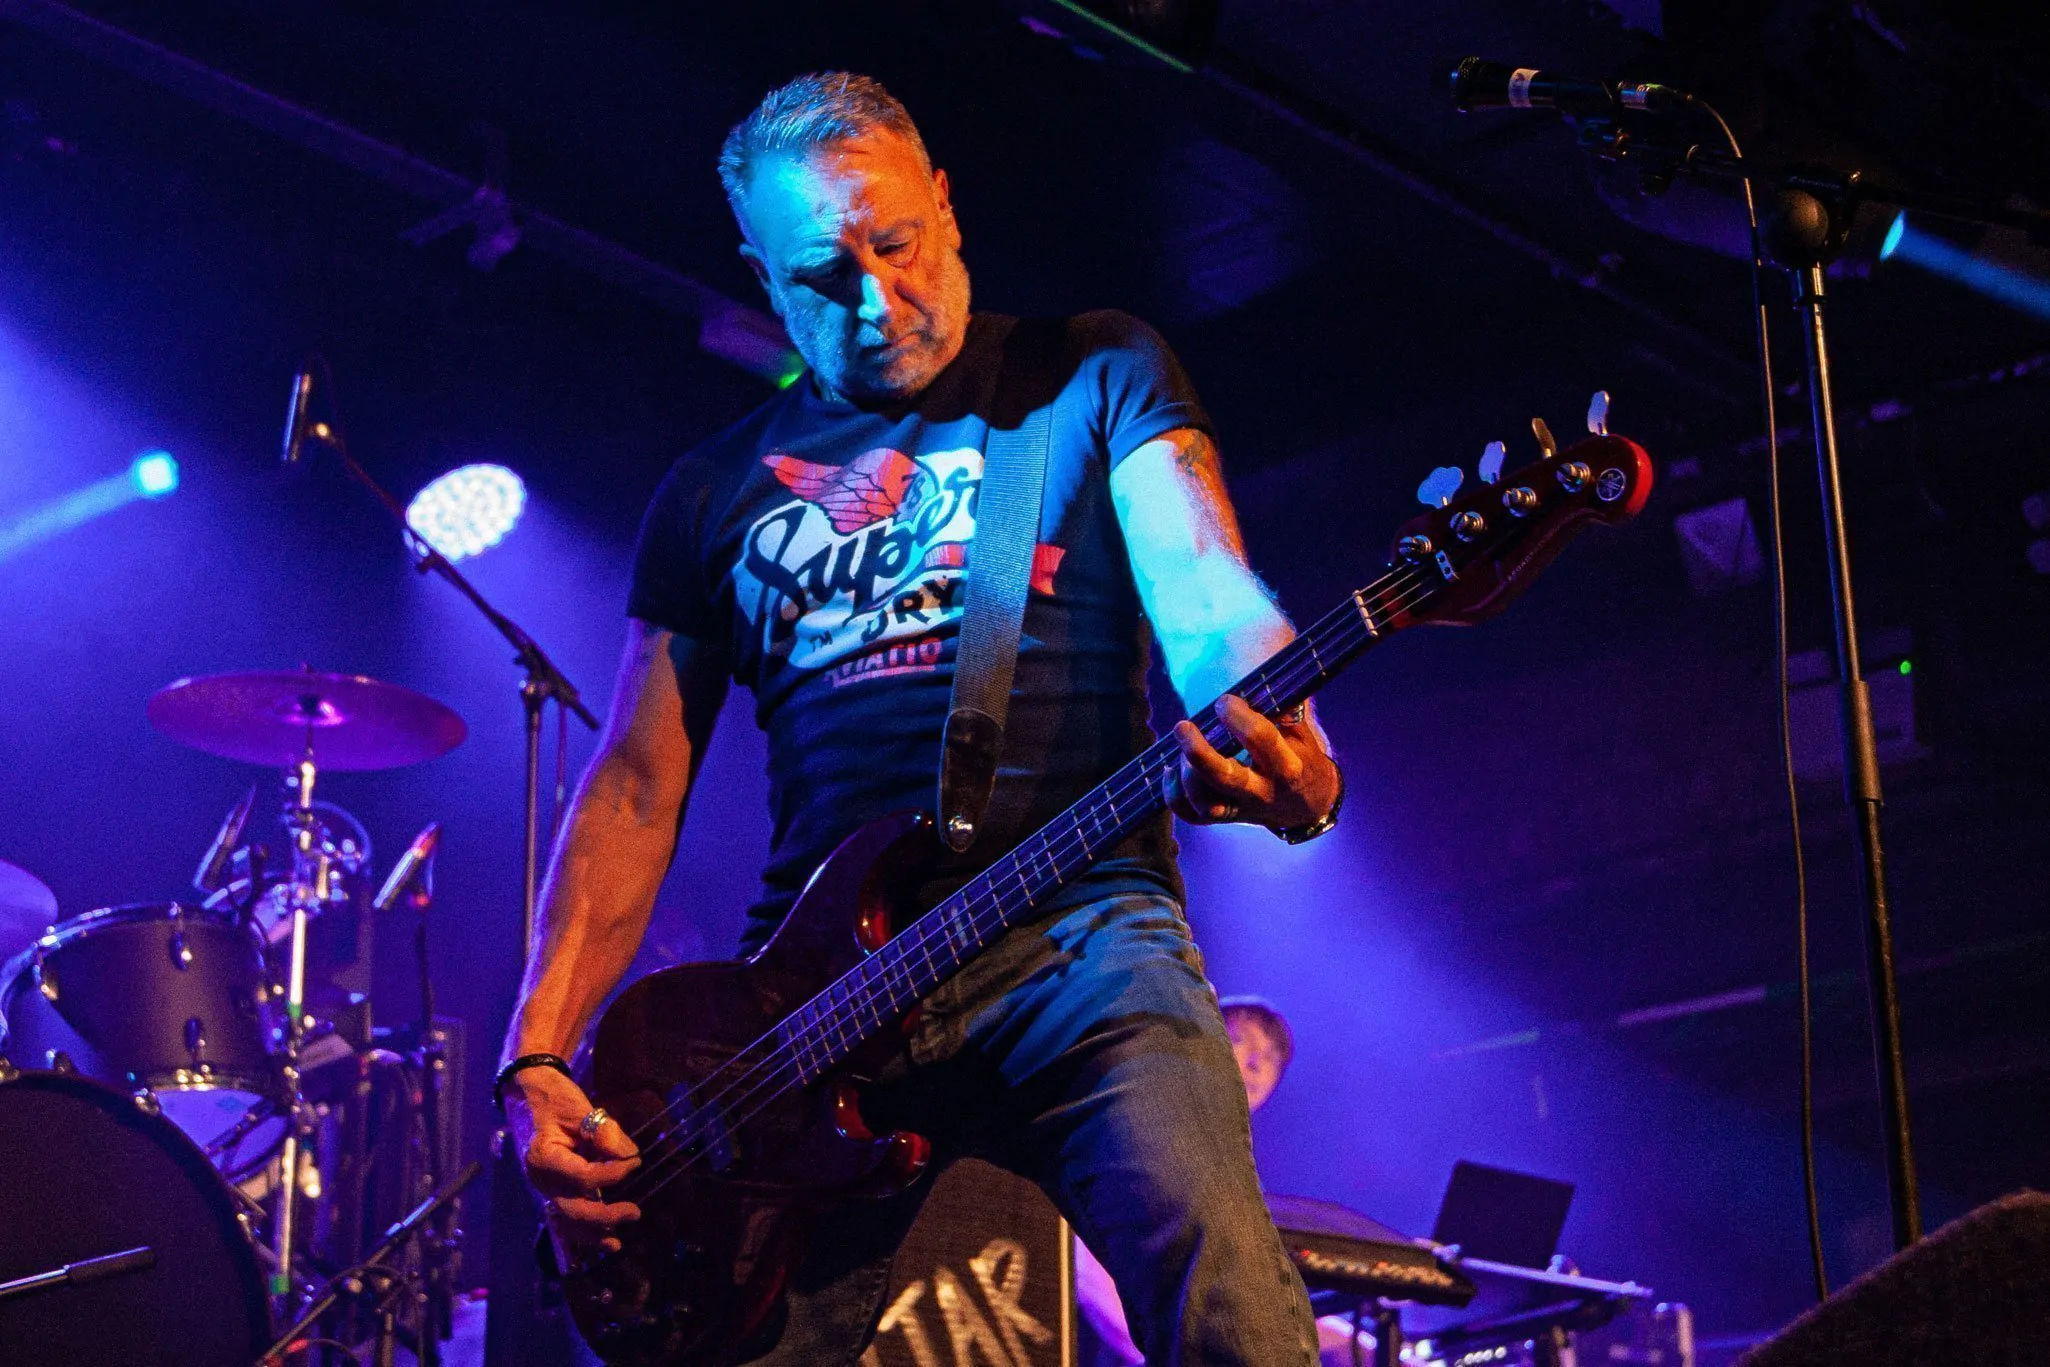 PETER HOOK & THE LIGHT announce Joy Division : A Celebration at Limelight, Belfast on Saturday, November 12th 2022